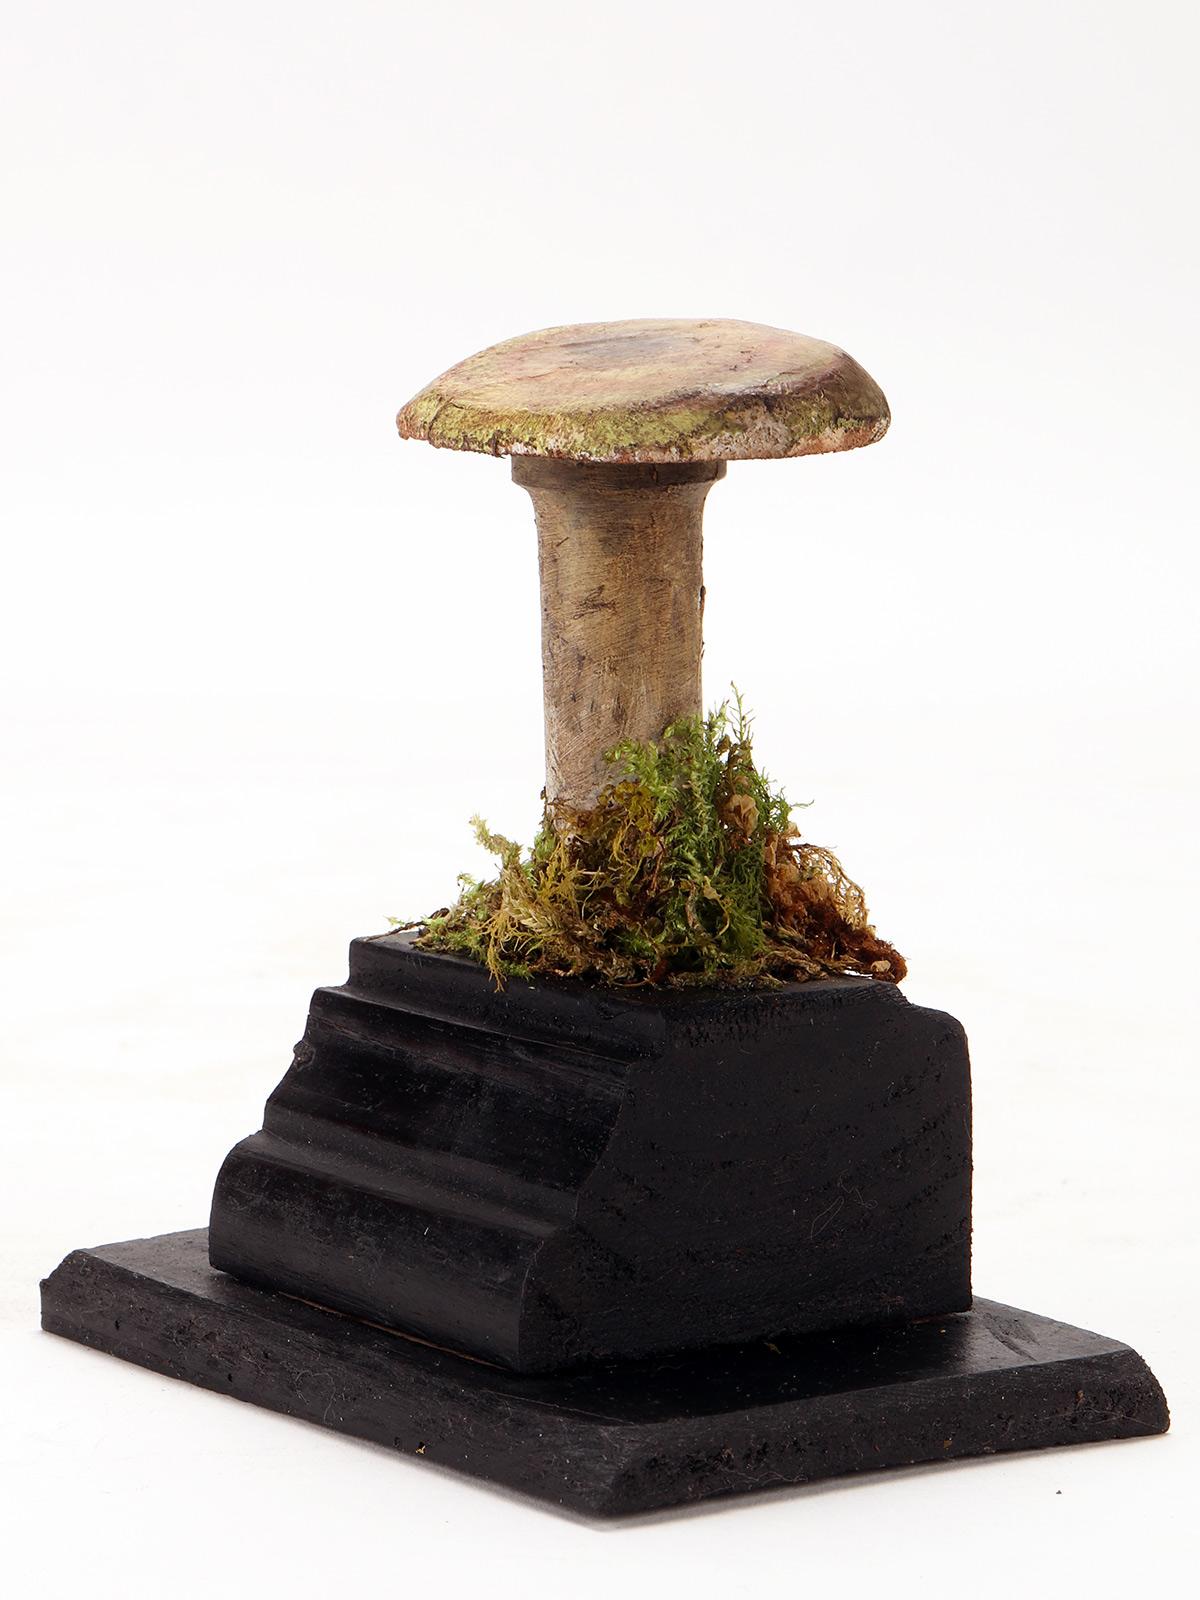 A diorama with 7 botanical models of various species of mushrooms, educational use, made of painted plaster and paper mache, mounted on rectangular wooden bases in black with moss and hay. The models are placed inside a black laquered wooden case,